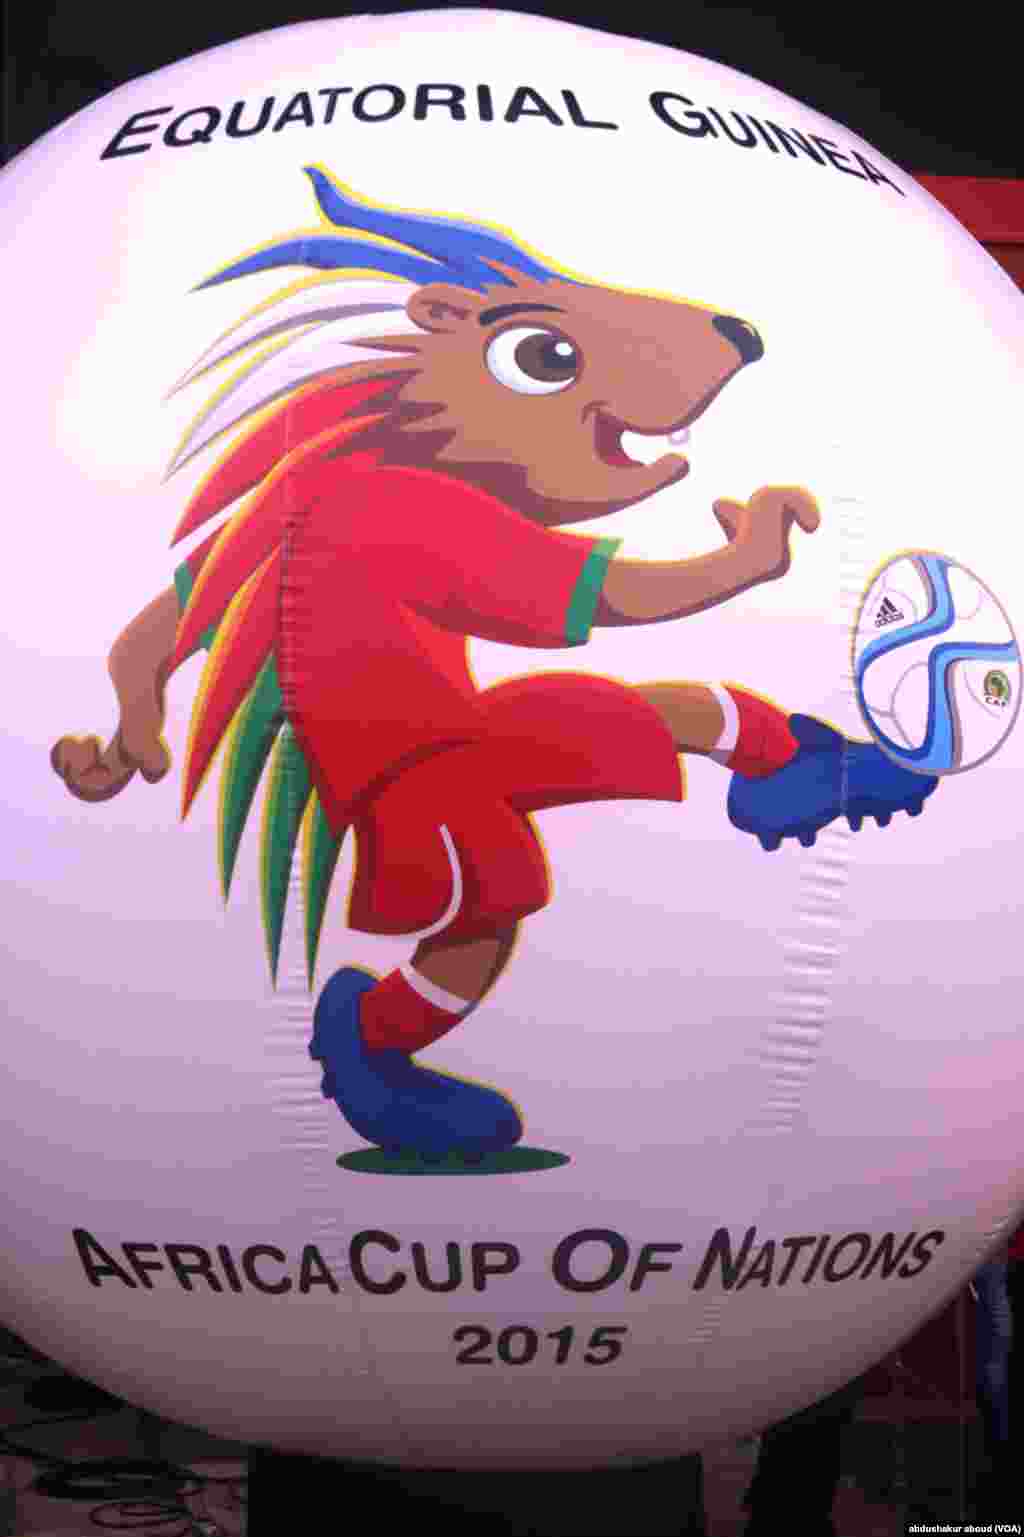 Chuka-Chuka, the official mascot of AFCON 2015, is ubiquitous throughout the country. &nbsp;